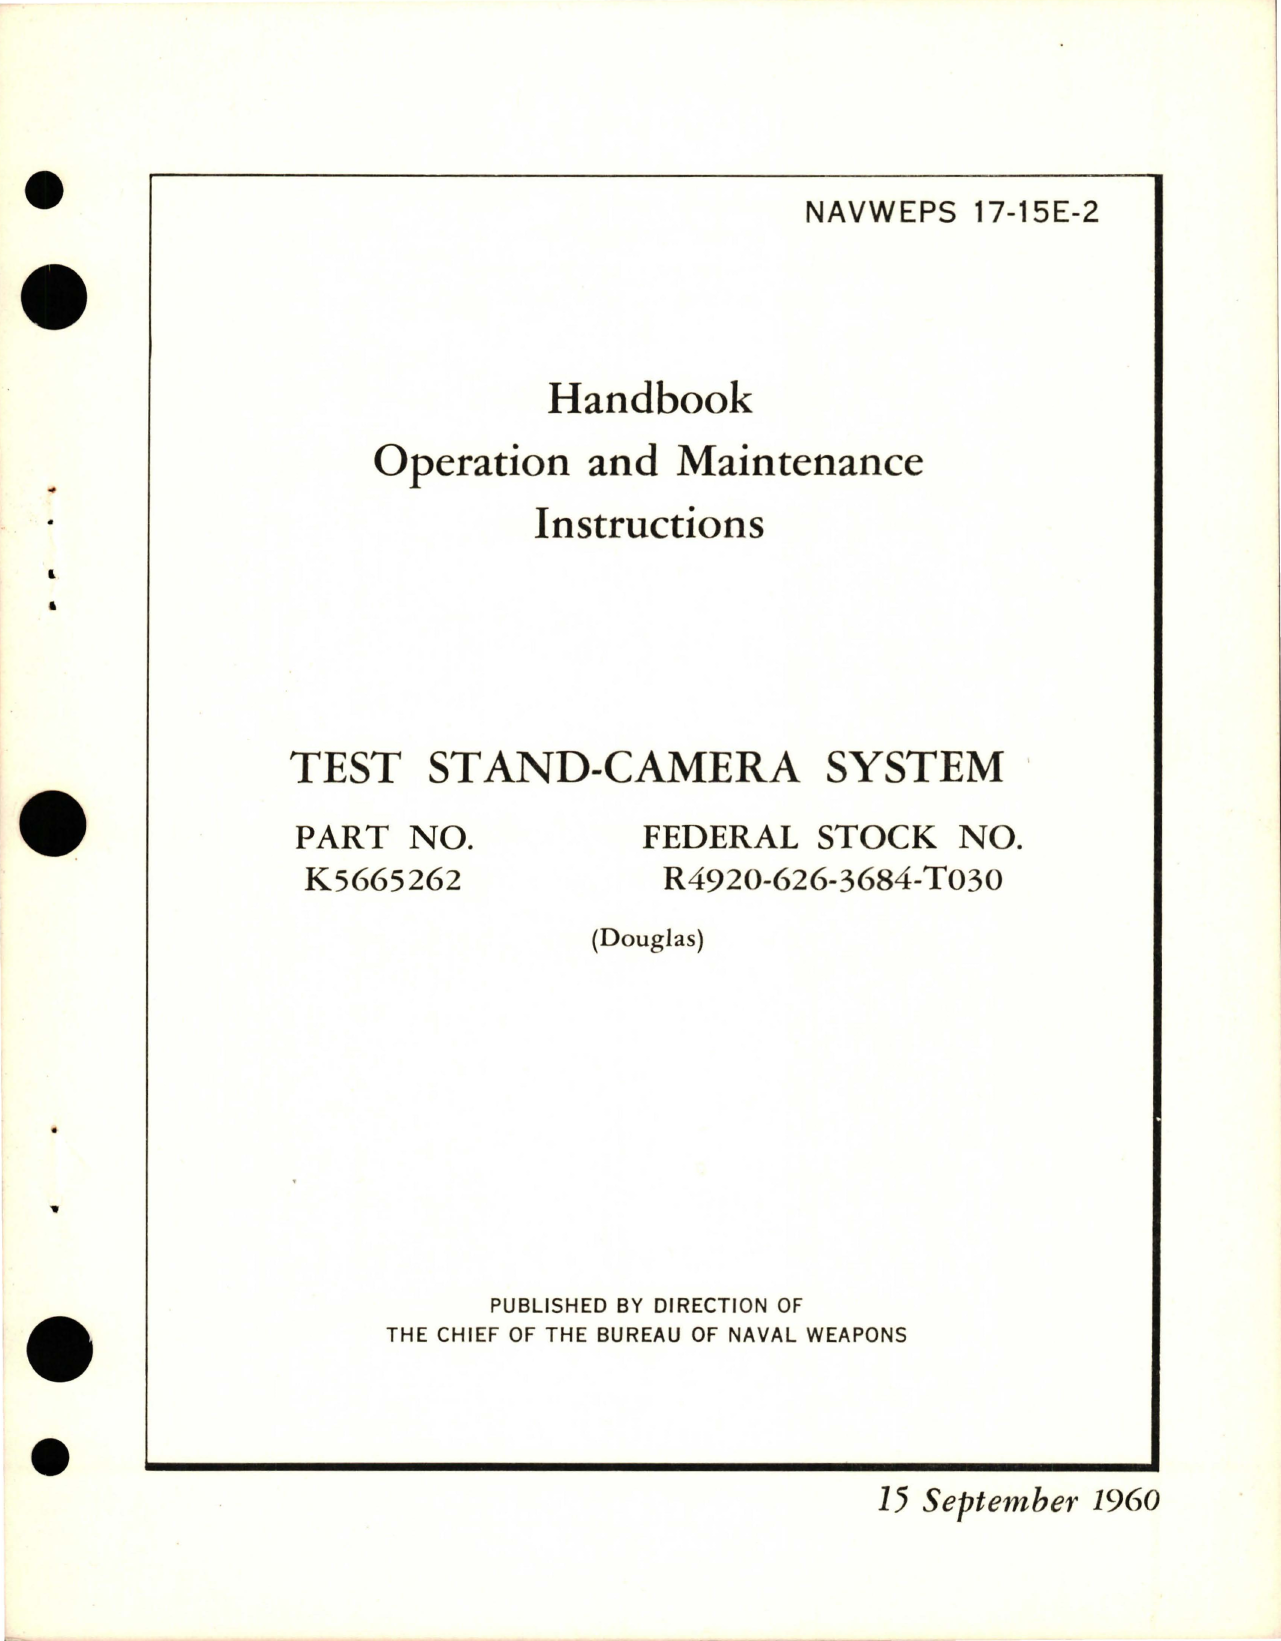 Sample page 1 from AirCorps Library document: Operation and Maintenance Instructions for Test Stand-Camera System - Part K5665262 